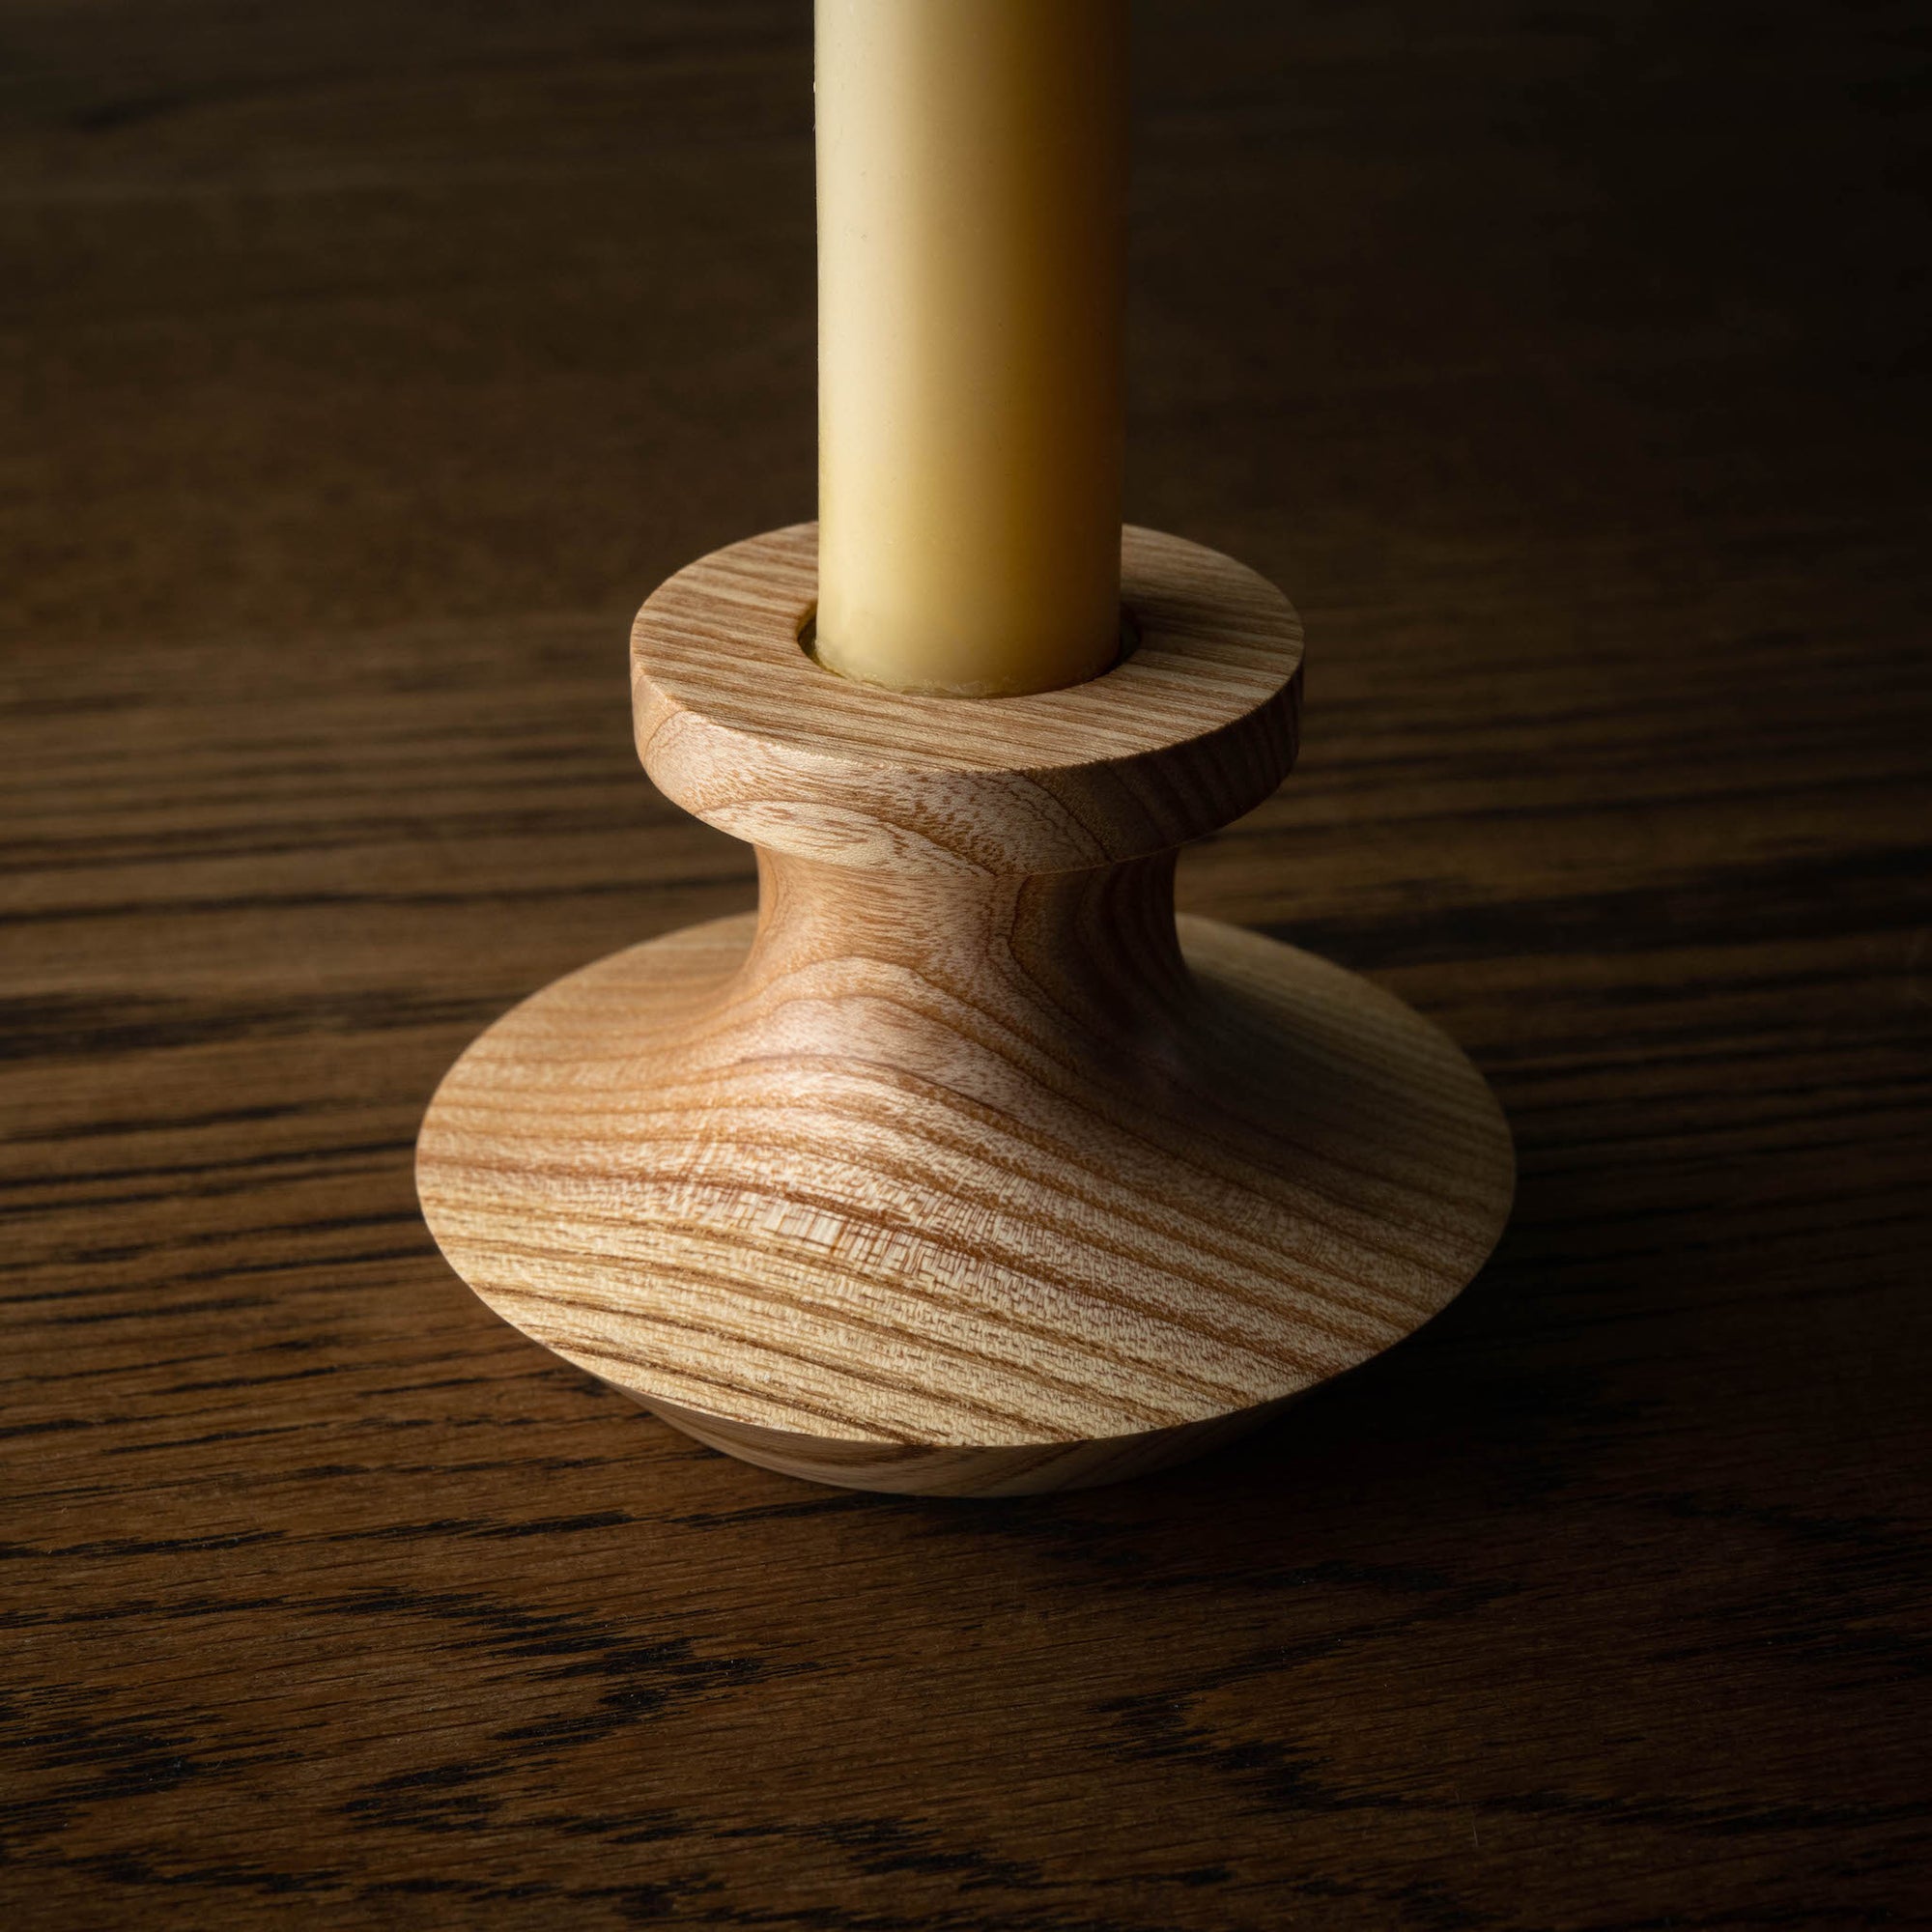 Selwyn House Hand Turned Candlestick & Beeswax Dinner Candle